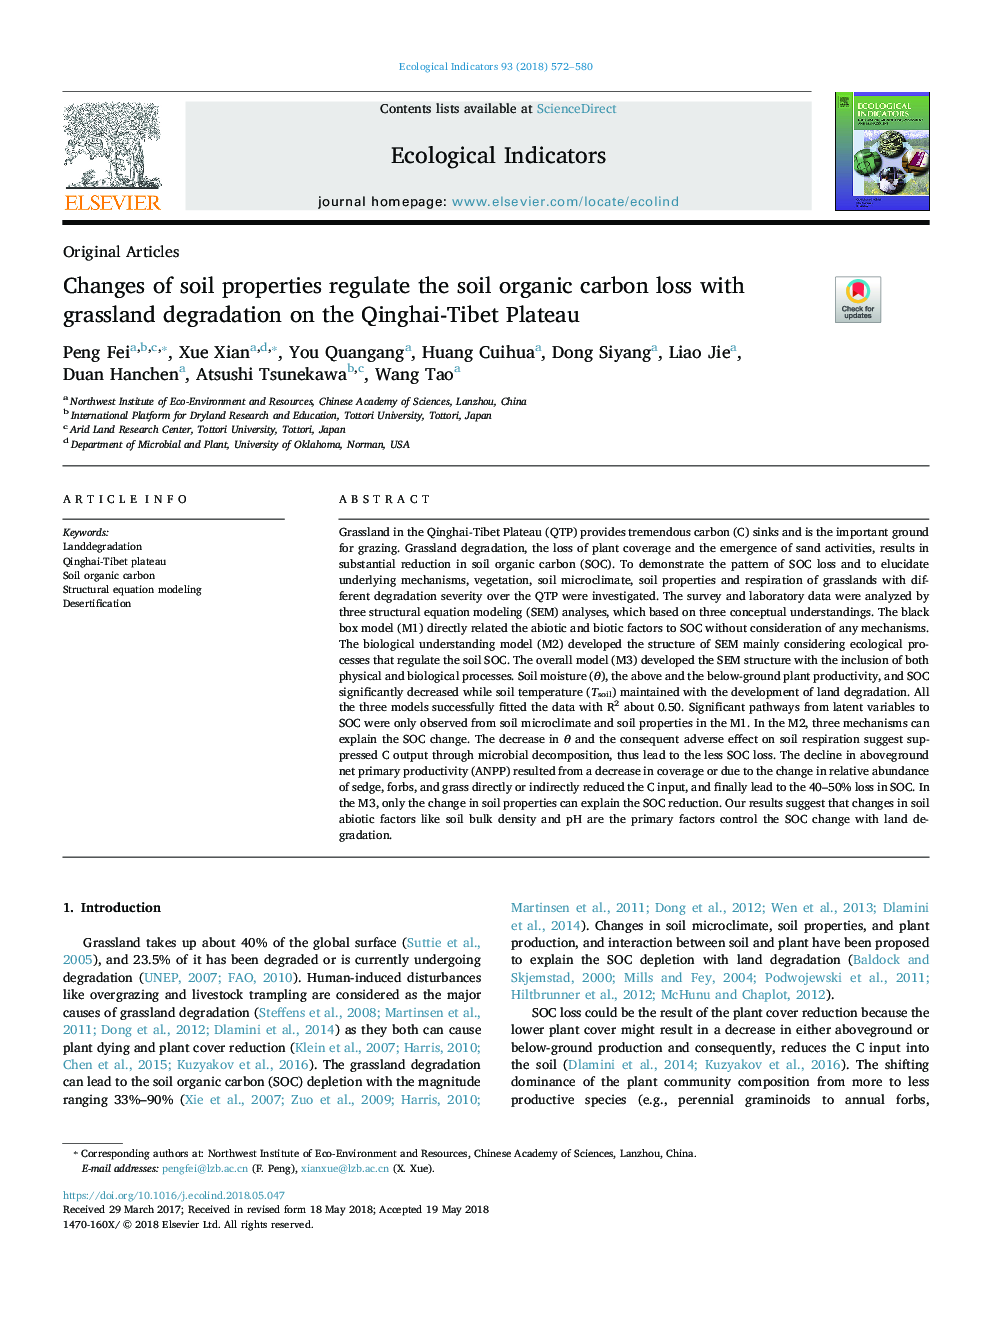 Changes of soil properties regulate the soil organic carbon loss with grassland degradation on the Qinghai-Tibet Plateau